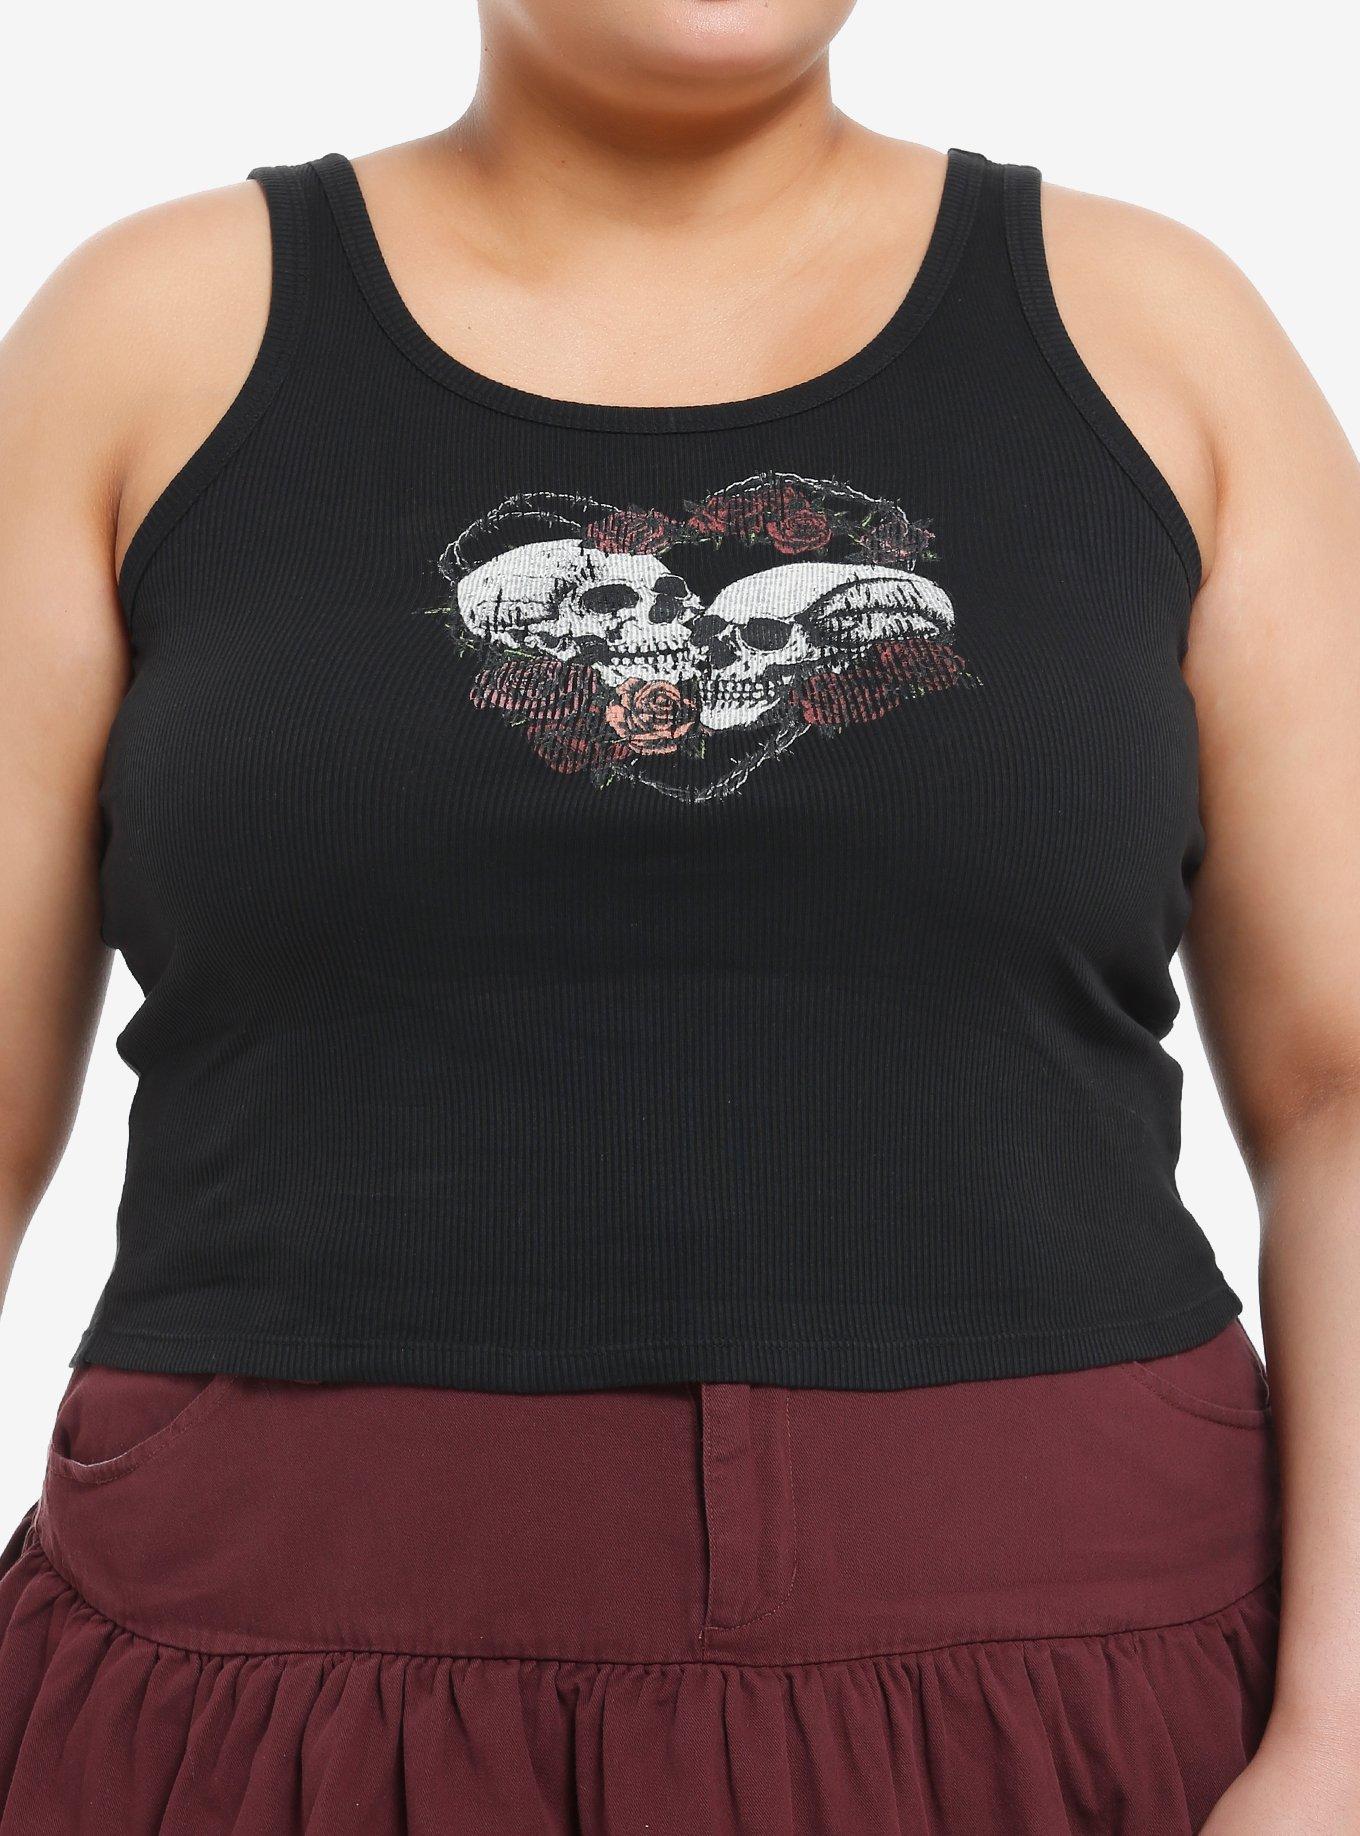 Social Collision Skull Heart Roses Girls Tank Top Plus Size, RED, hi-res